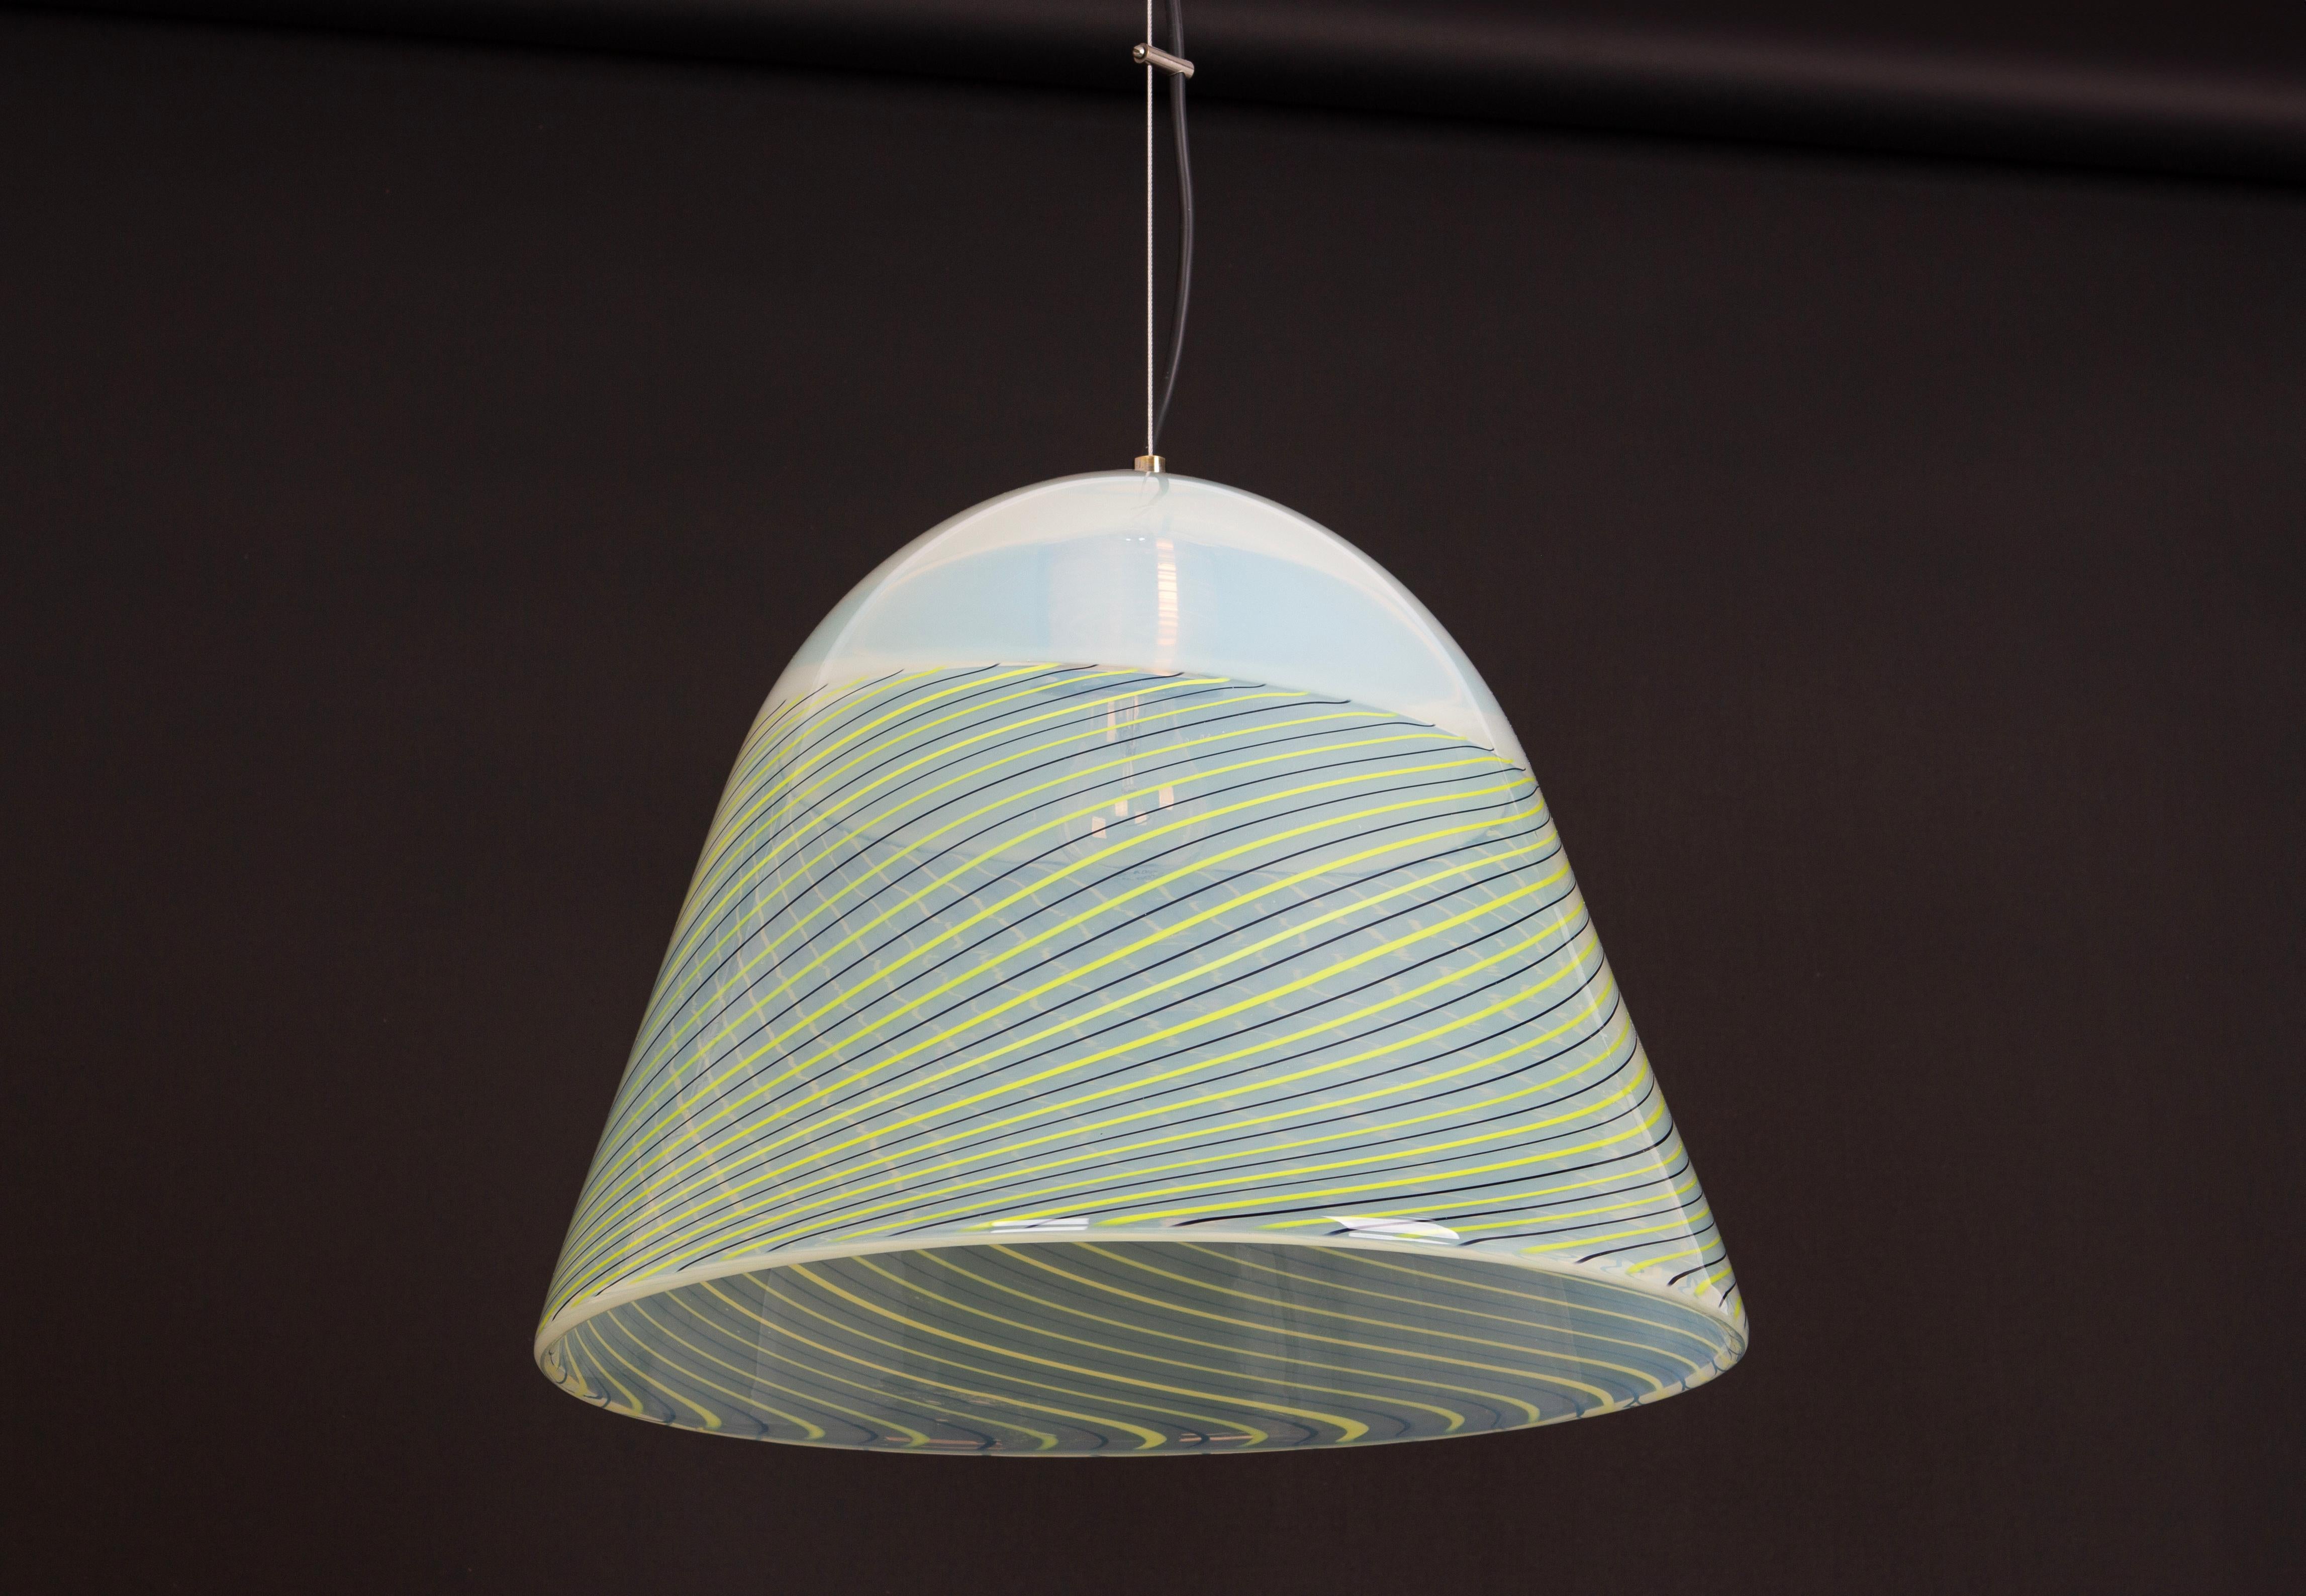 Large Pendant Light in style of Kalmar-Fazzoletto, Italy, 1970s For Sale 6